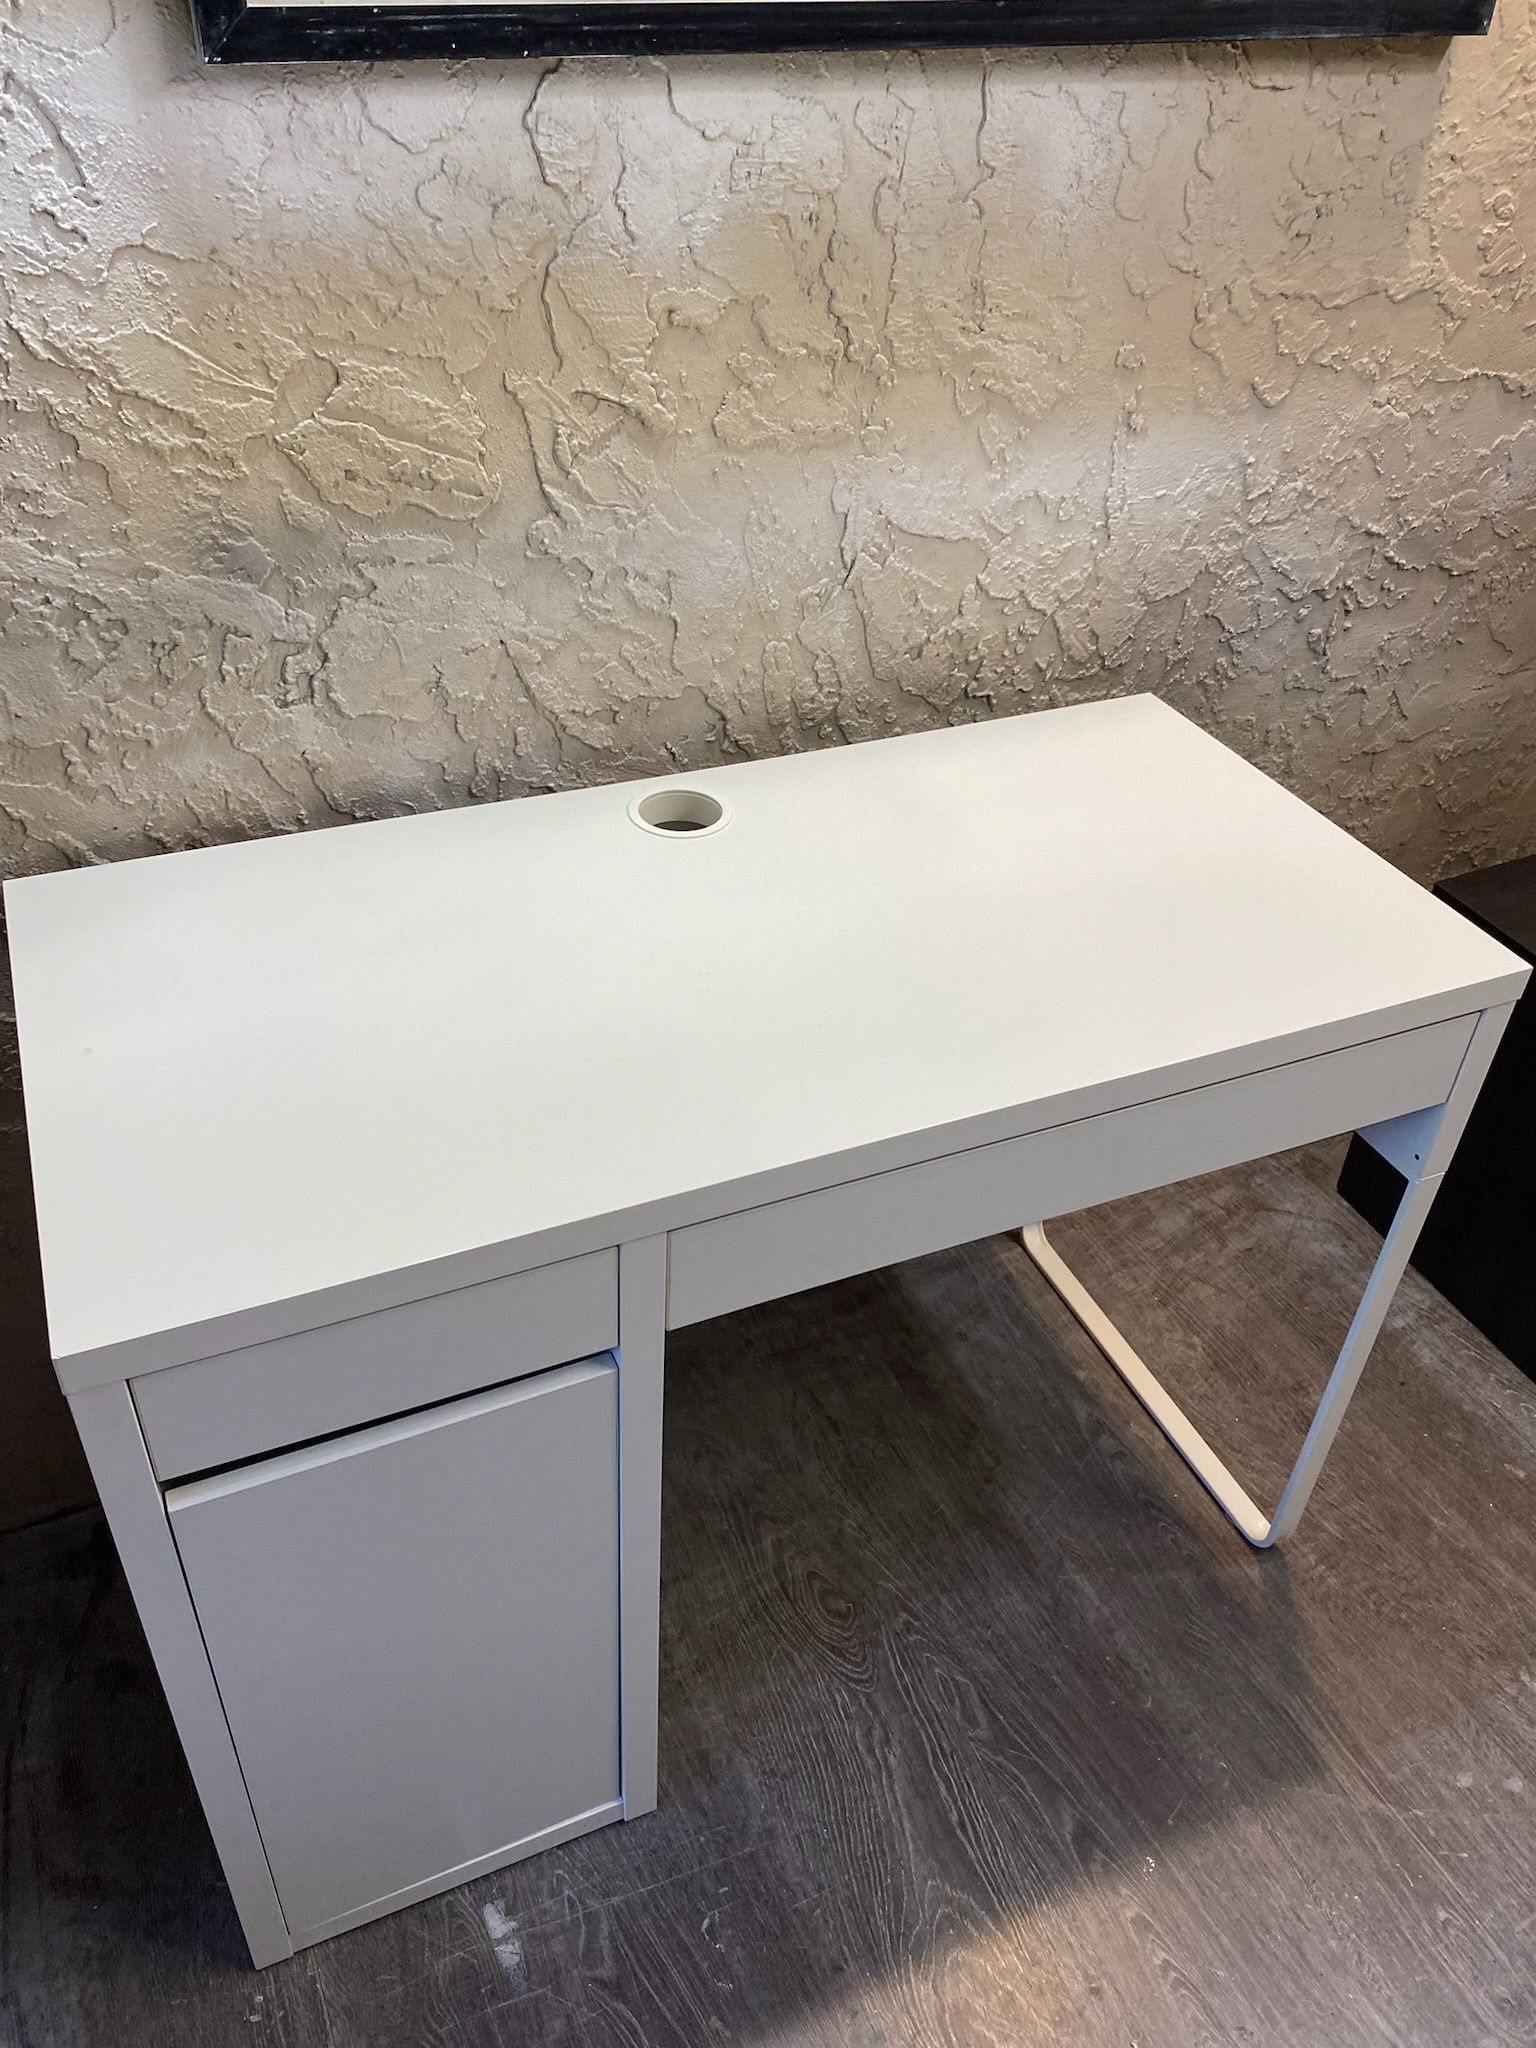 White Desk with Storage - Delivery Available for a Fee - See my other items 😁